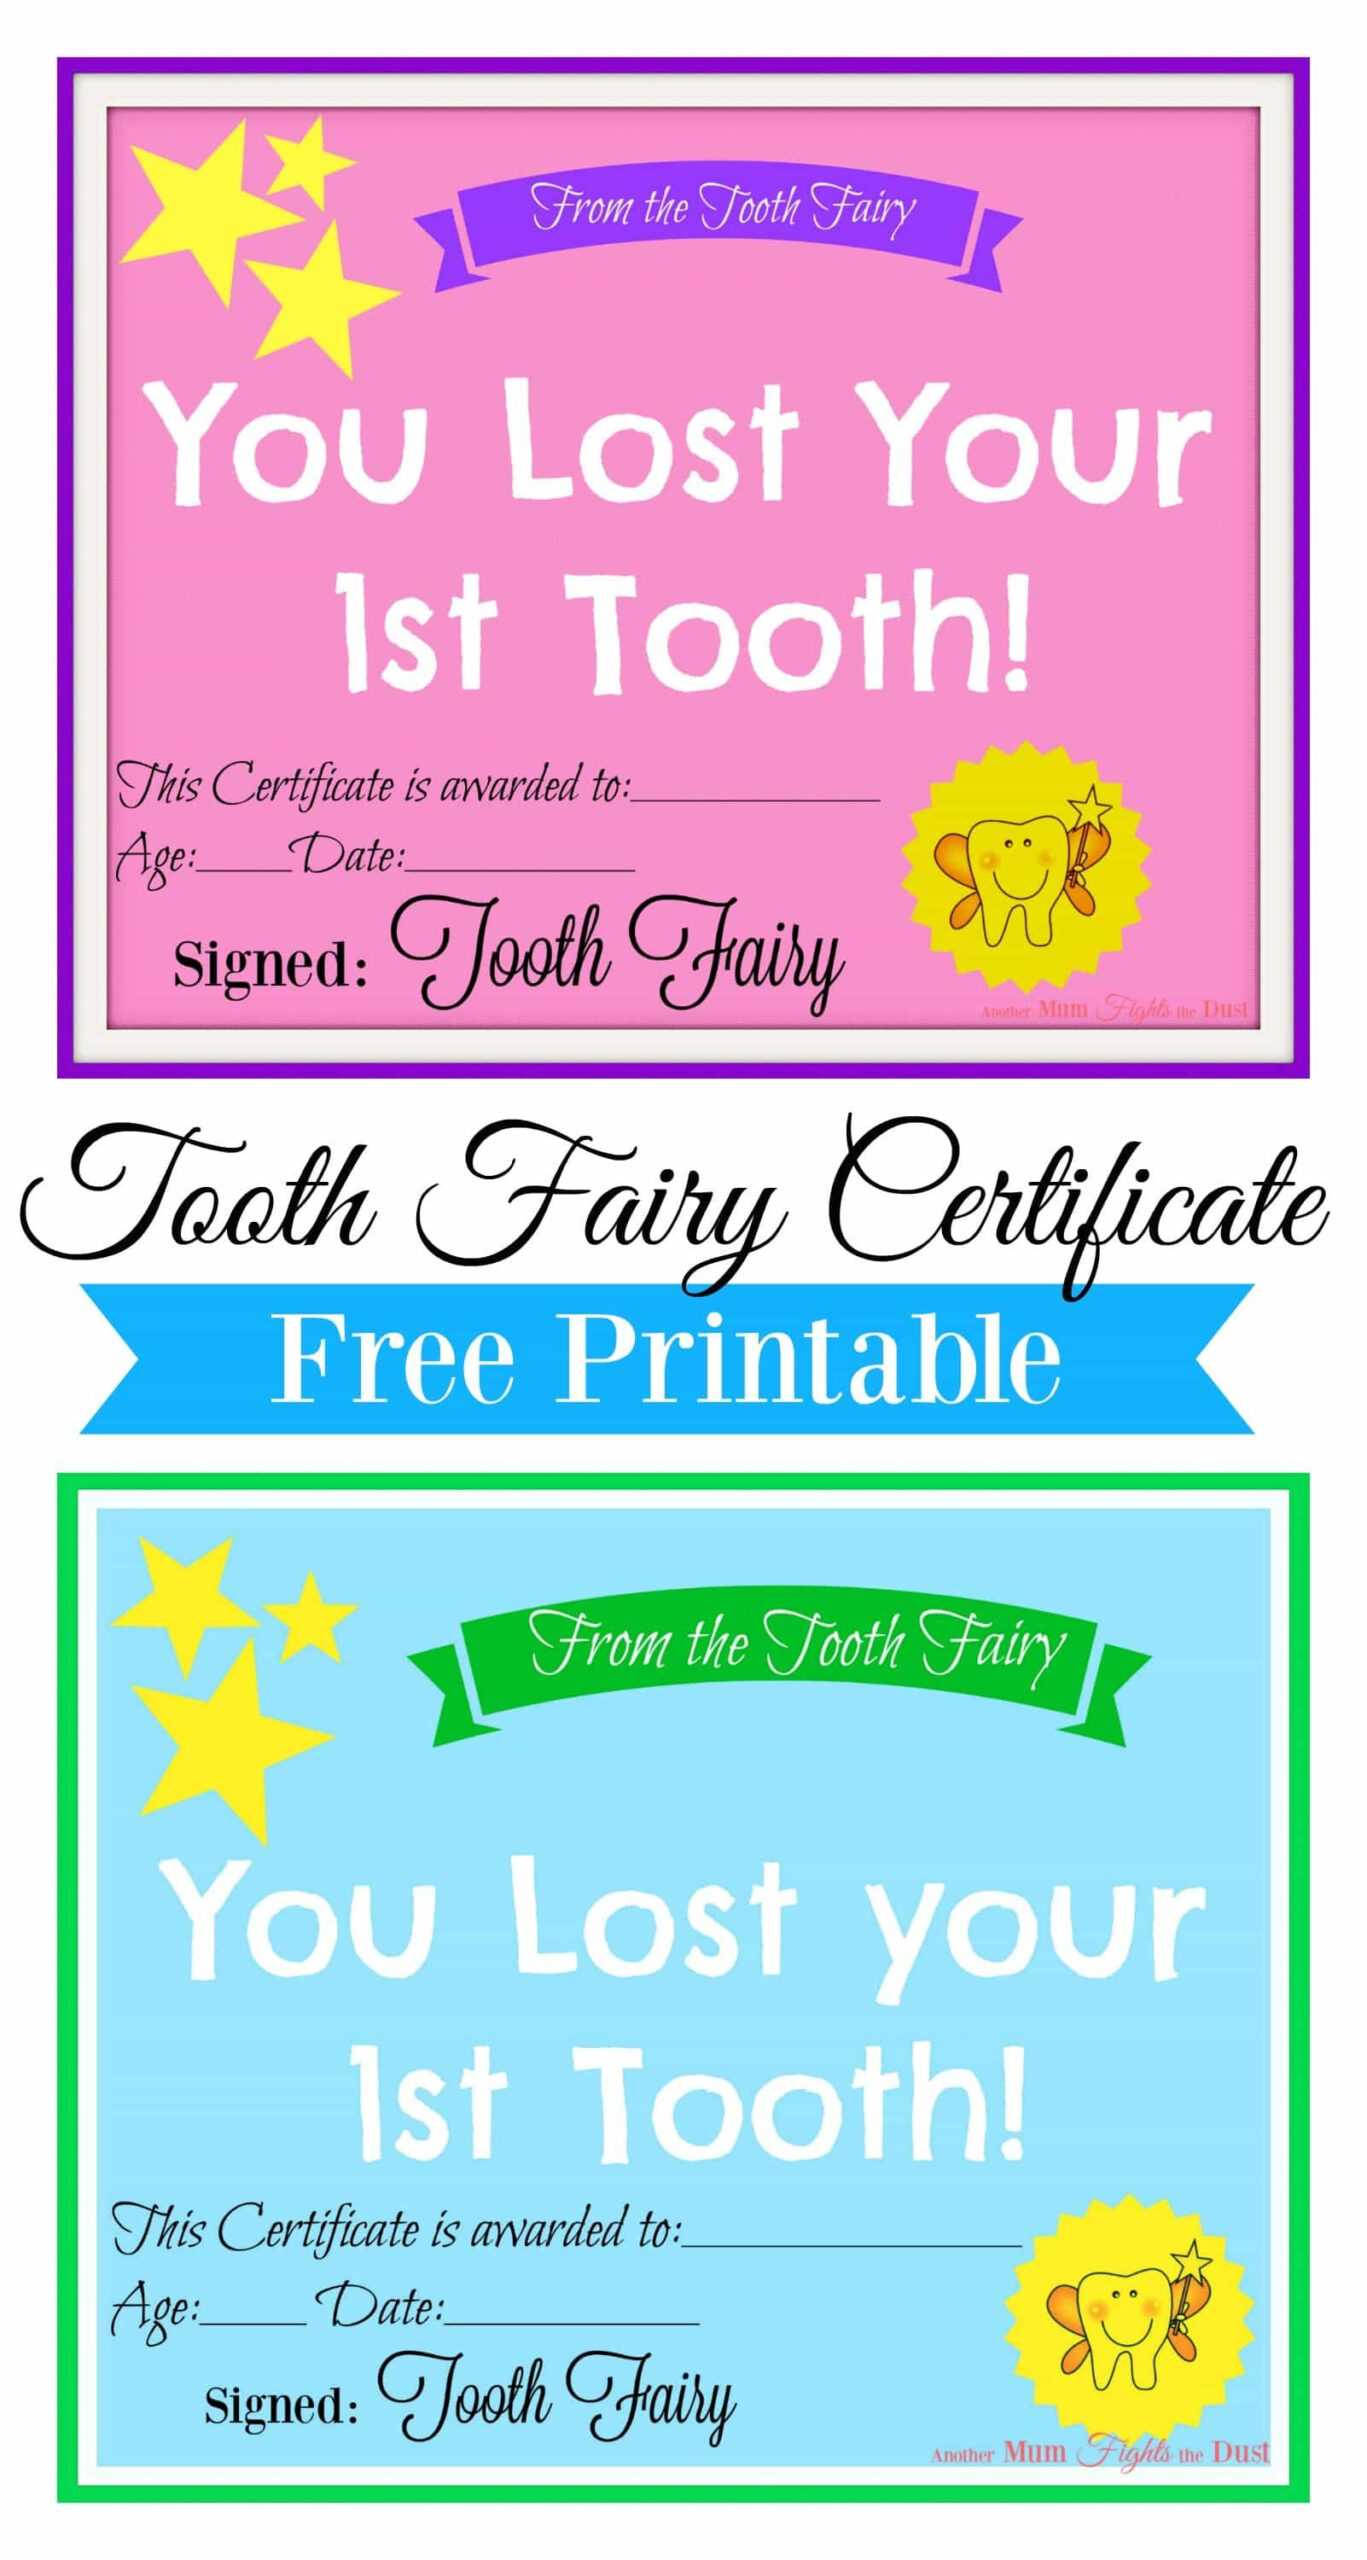 Free Printable Tooth Fairy Certificate | Tooth Fairy Intended For Free Tooth Fairy Certificate Template